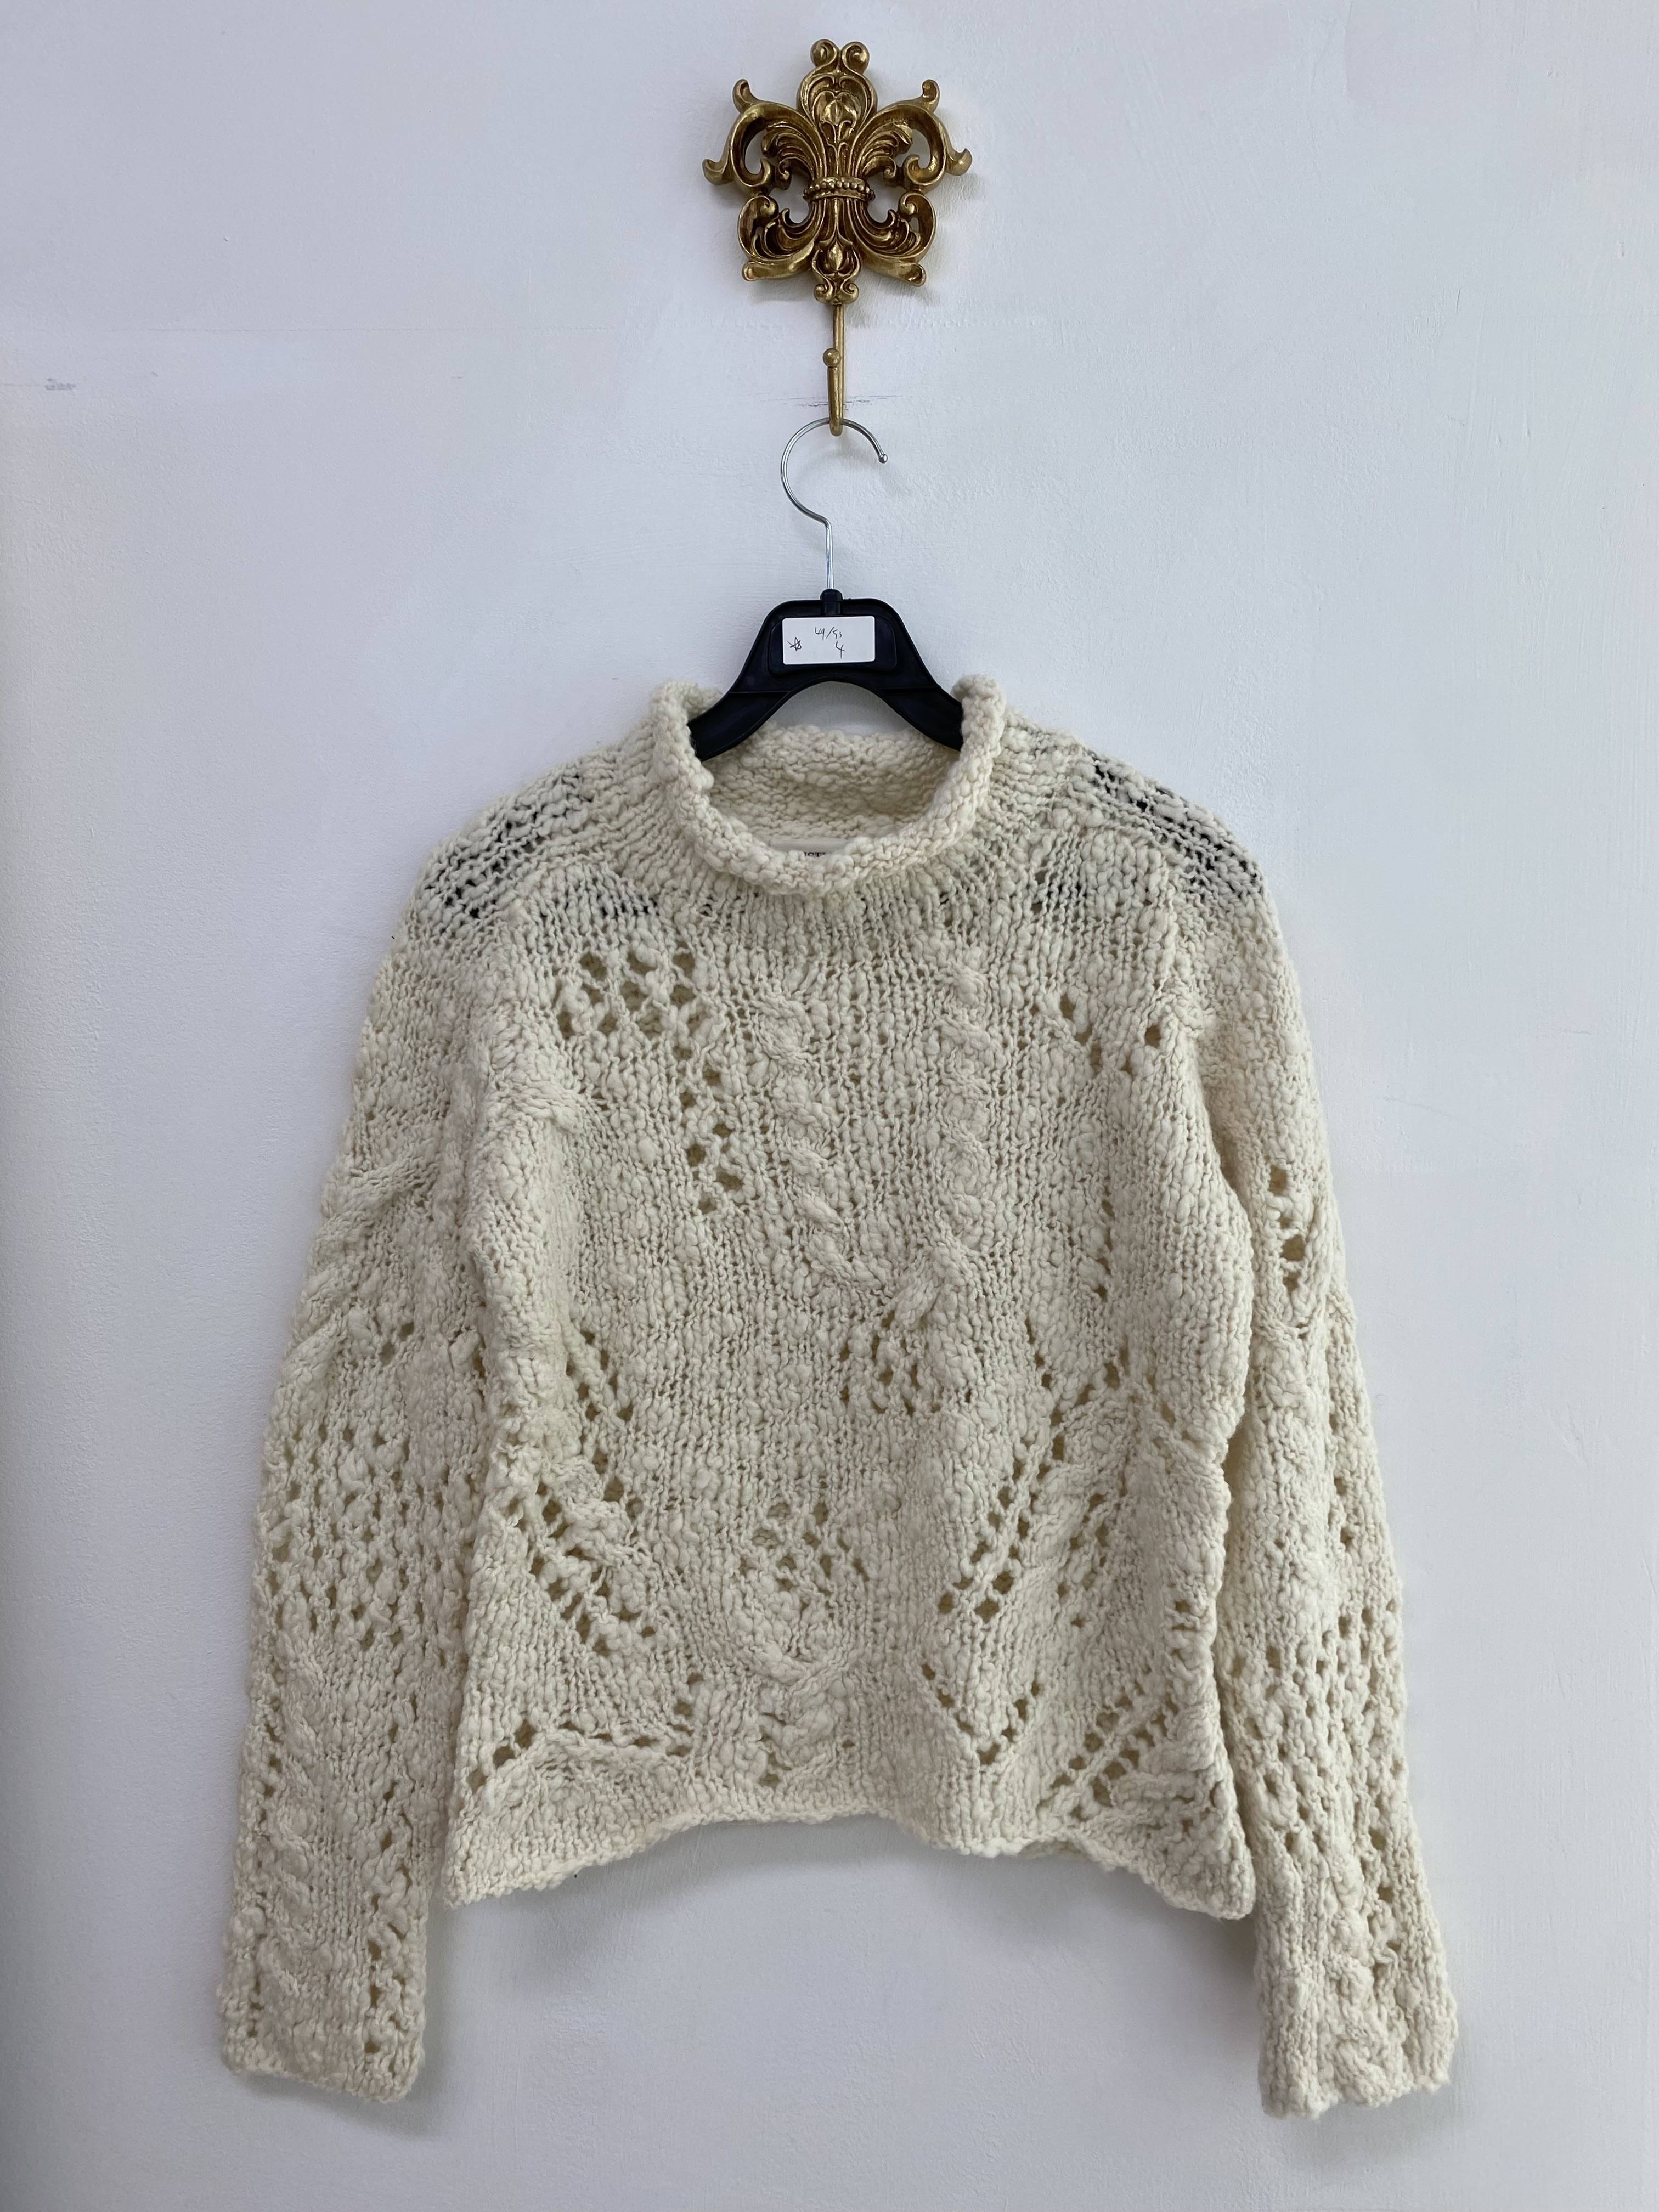 Christian Aujard ivory unique pattern cable knit